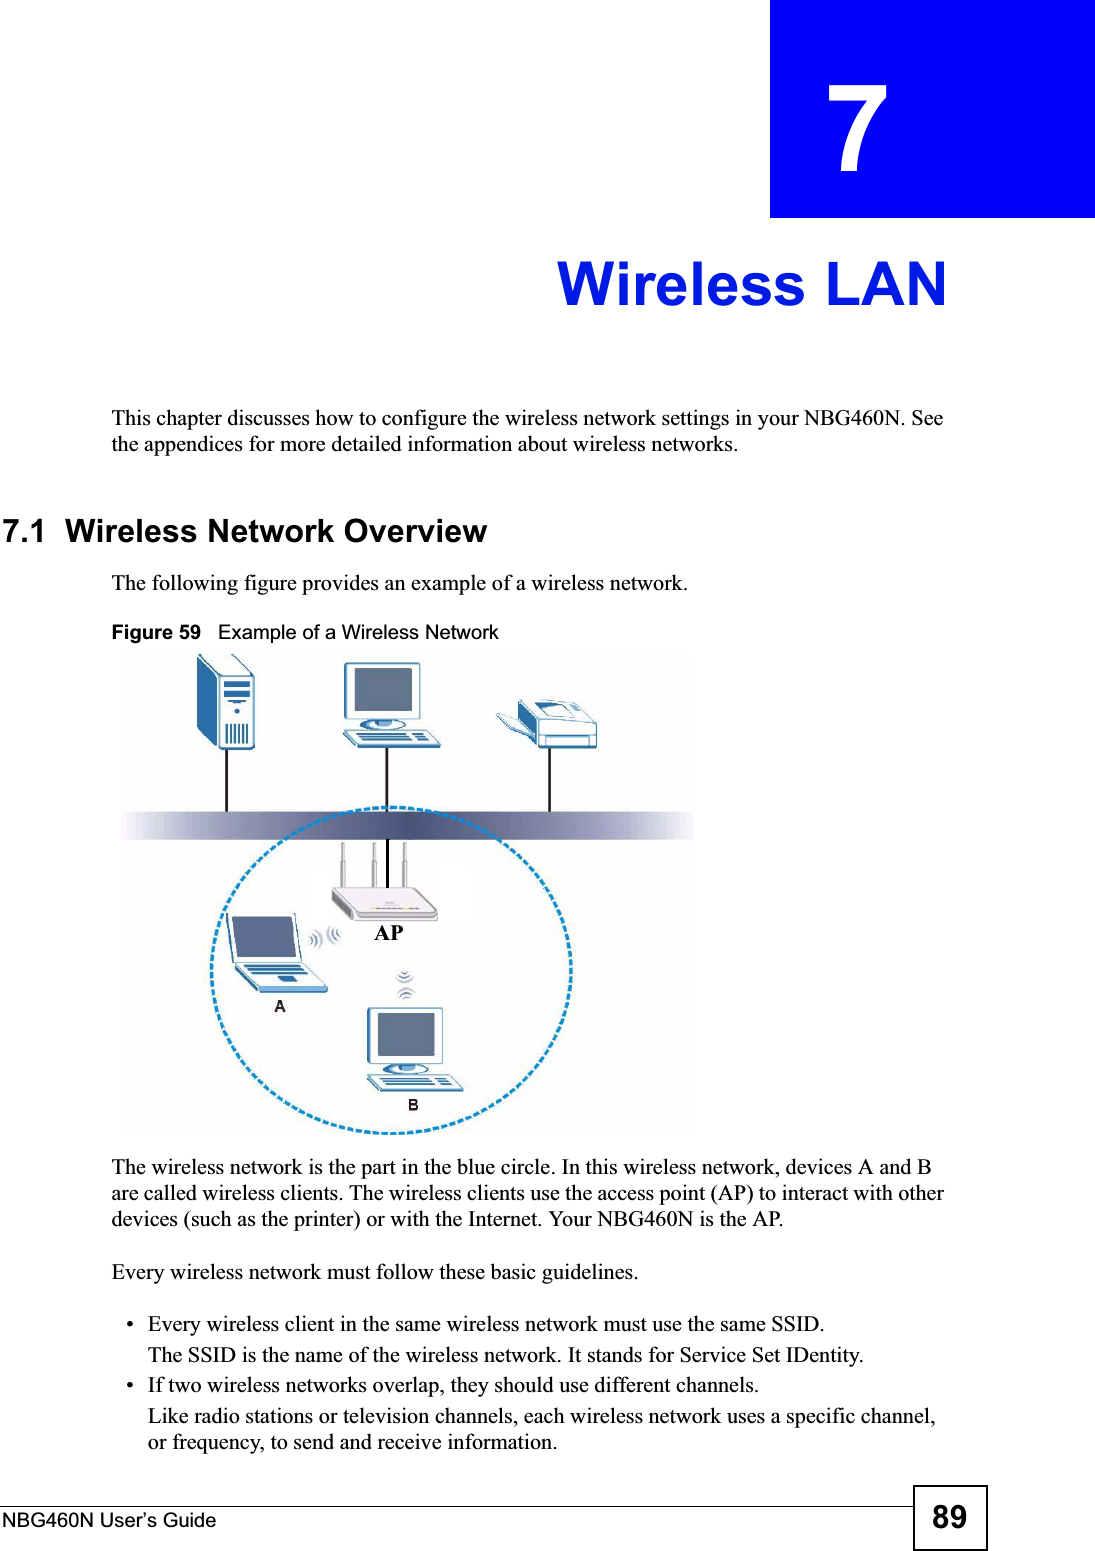 NBG460N User’s Guide 89CHAPTER  7 Wireless LANThis chapter discusses how to configure the wireless network settings in your NBG460N. See the appendices for more detailed information about wireless networks.7.1  Wireless Network OverviewThe following figure provides an example of a wireless network.Figure 59   Example of a Wireless NetworkThe wireless network is the part in the blue circle. In this wireless network, devices A and B are called wireless clients. The wireless clients use the access point (AP) to interact with other devices (such as the printer) or with the Internet. Your NBG460N is the AP.Every wireless network must follow these basic guidelines.• Every wireless client in the same wireless network must use the same SSID.The SSID is the name of the wireless network. It stands for Service Set IDentity.• If two wireless networks overlap, they should use different channels.Like radio stations or television channels, each wireless network uses a specific channel, or frequency, to send and receive information.AP